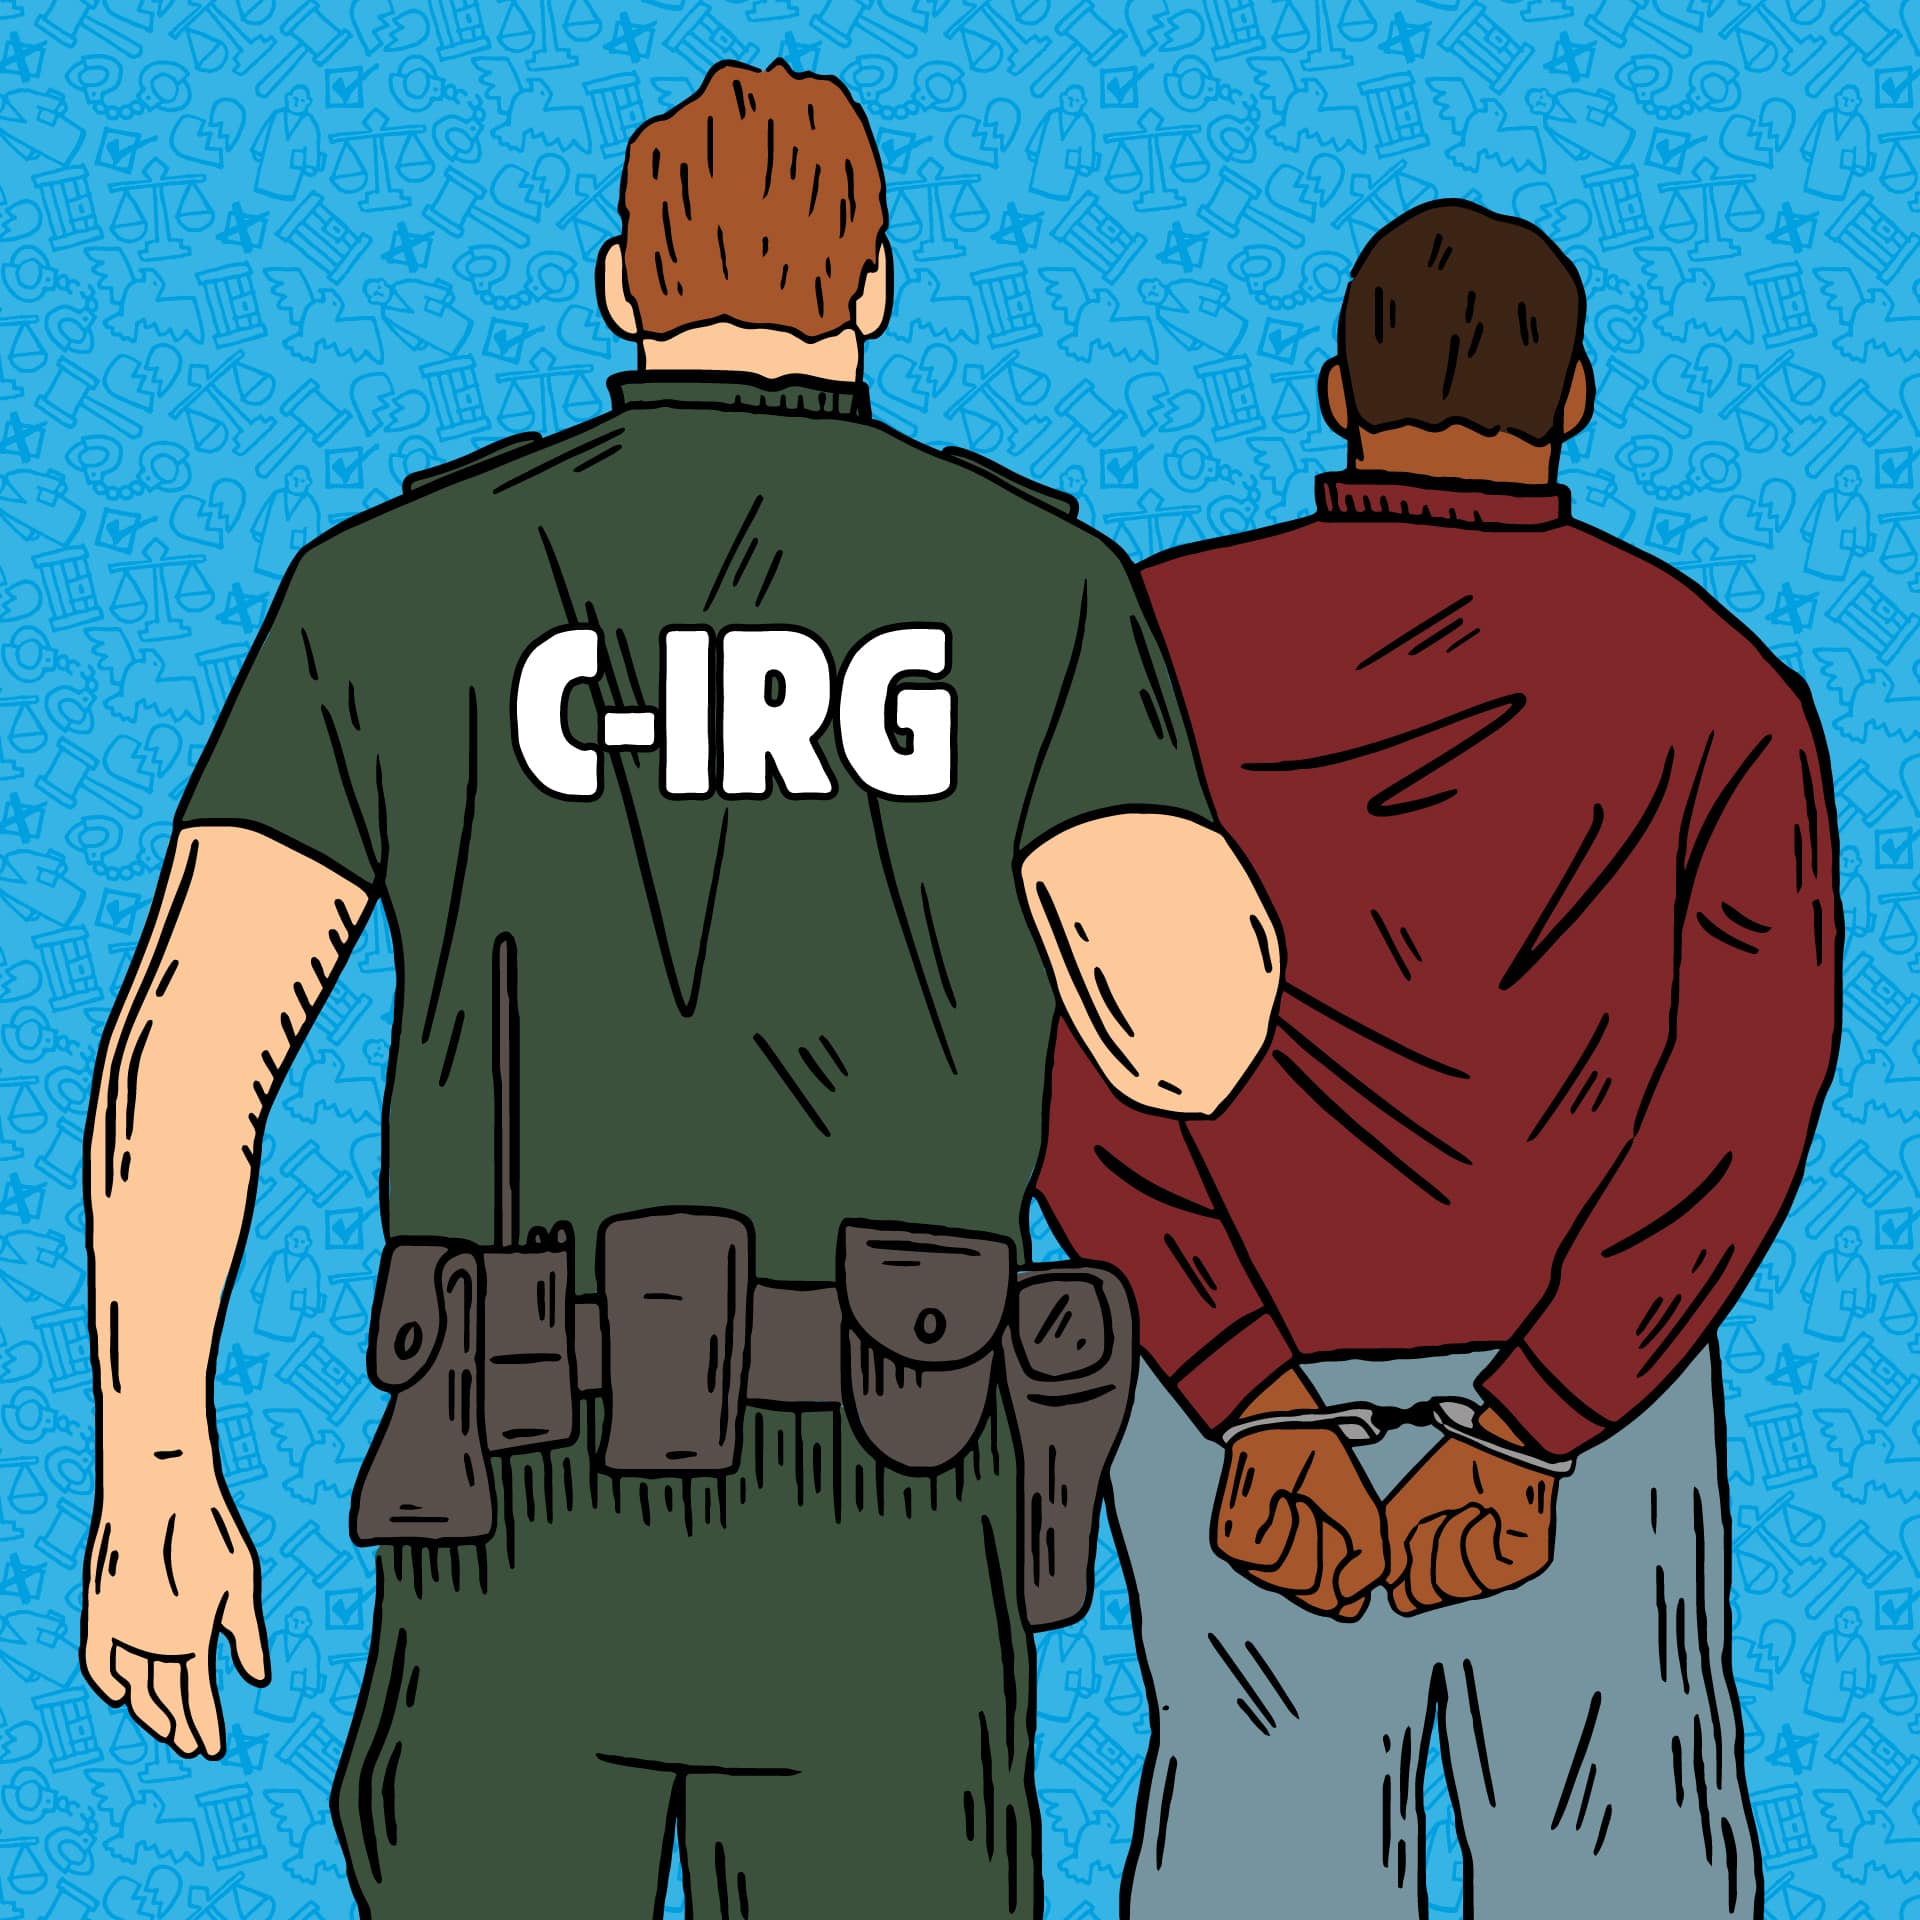 Disband C-IRG Now! Why This Secretive Police Unit Should be Shut Down While It’s Being Investigated